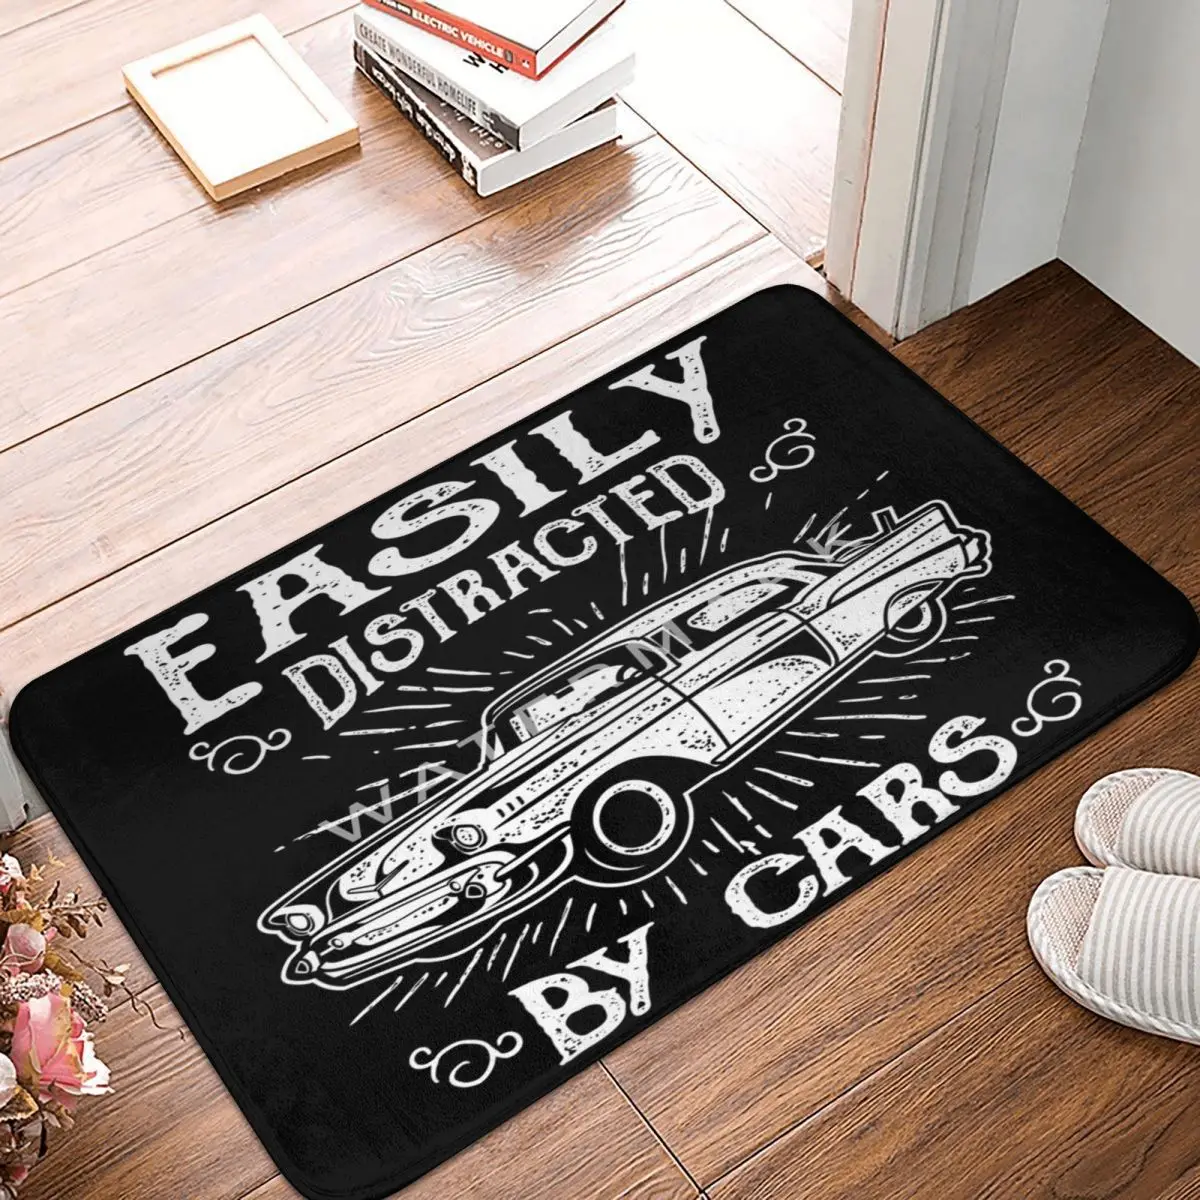 

Easily Distracted By Cars Carpet, Polyester Floor Mats Modern Practical Home Decor Festivle Gifts Mats Customizable